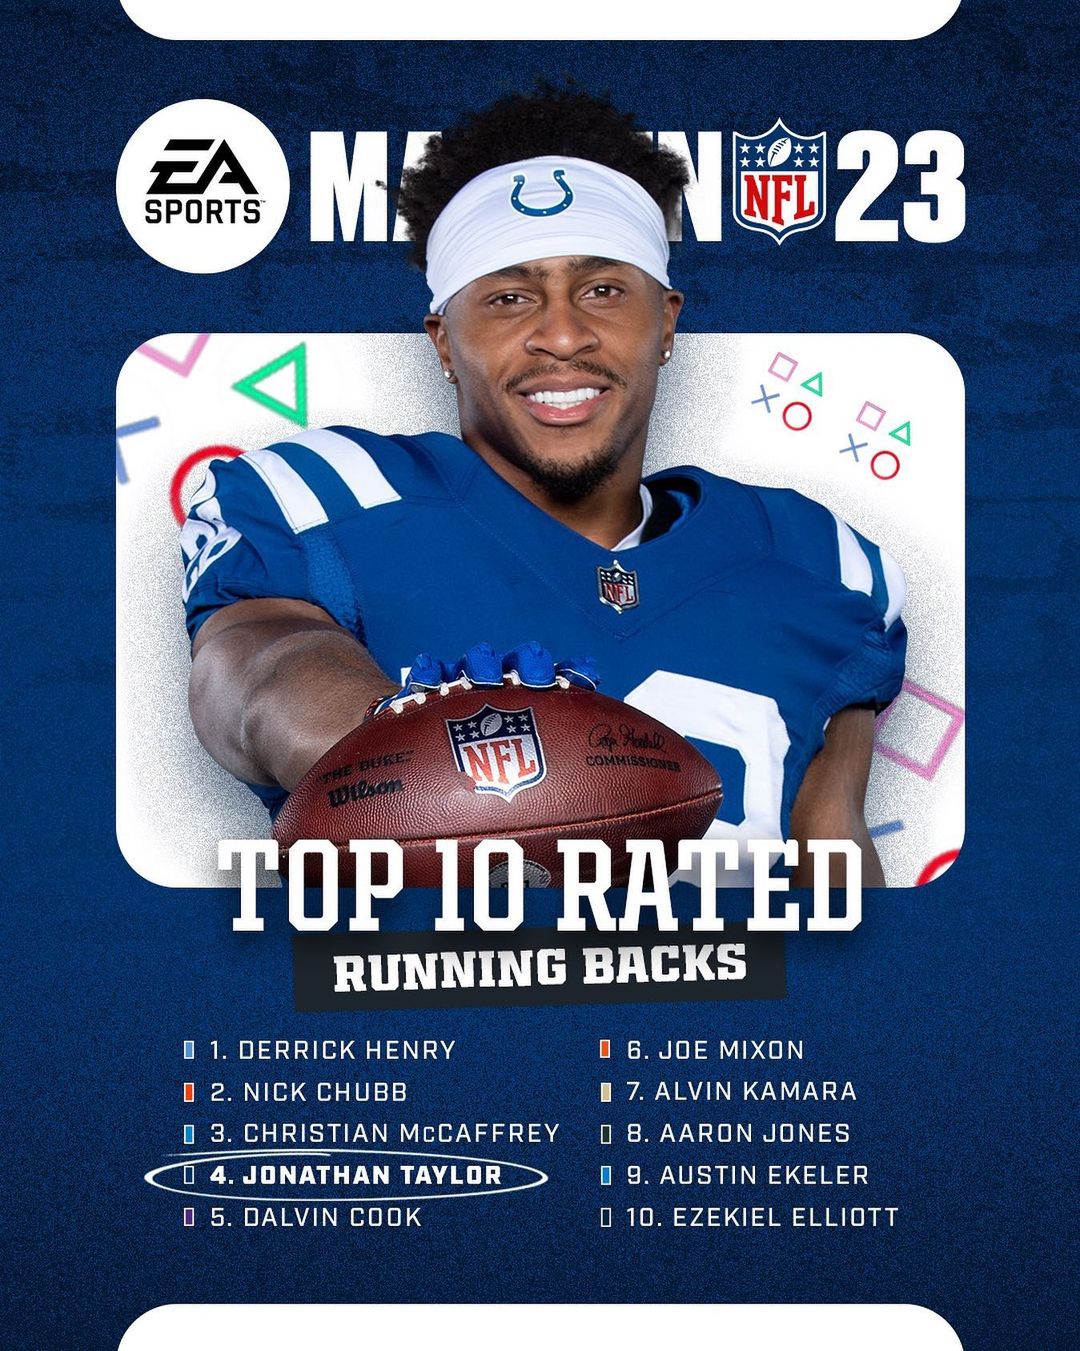 let’s talk about it. #Madden23...